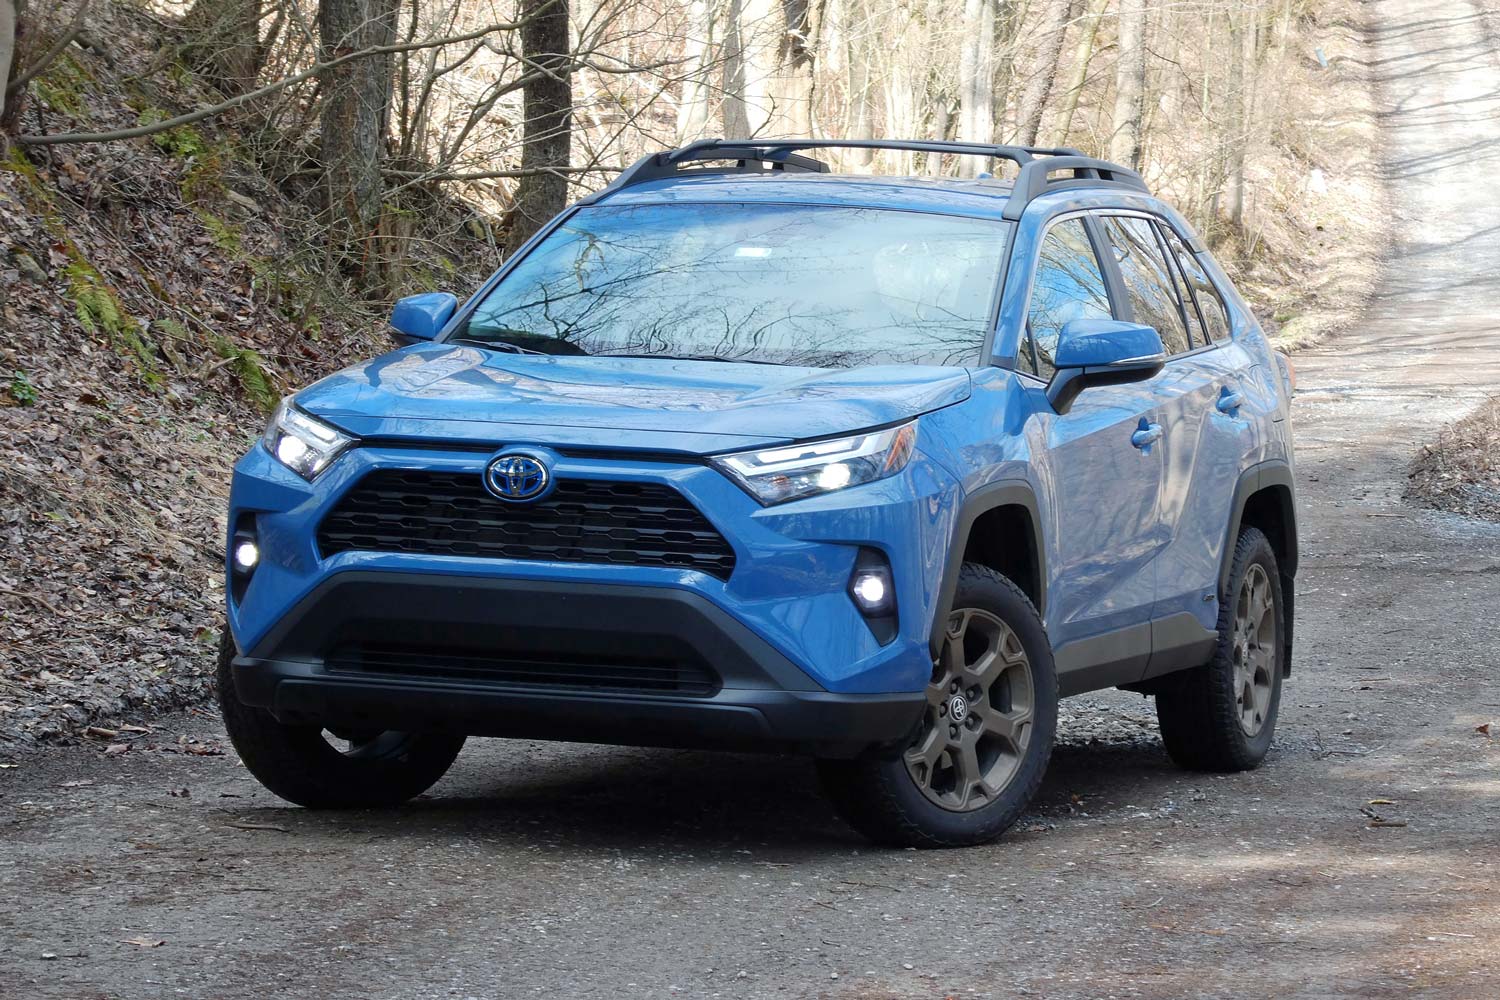 Auto review: 2023 Toyota RAV4 hybrid offers strong fuel economy